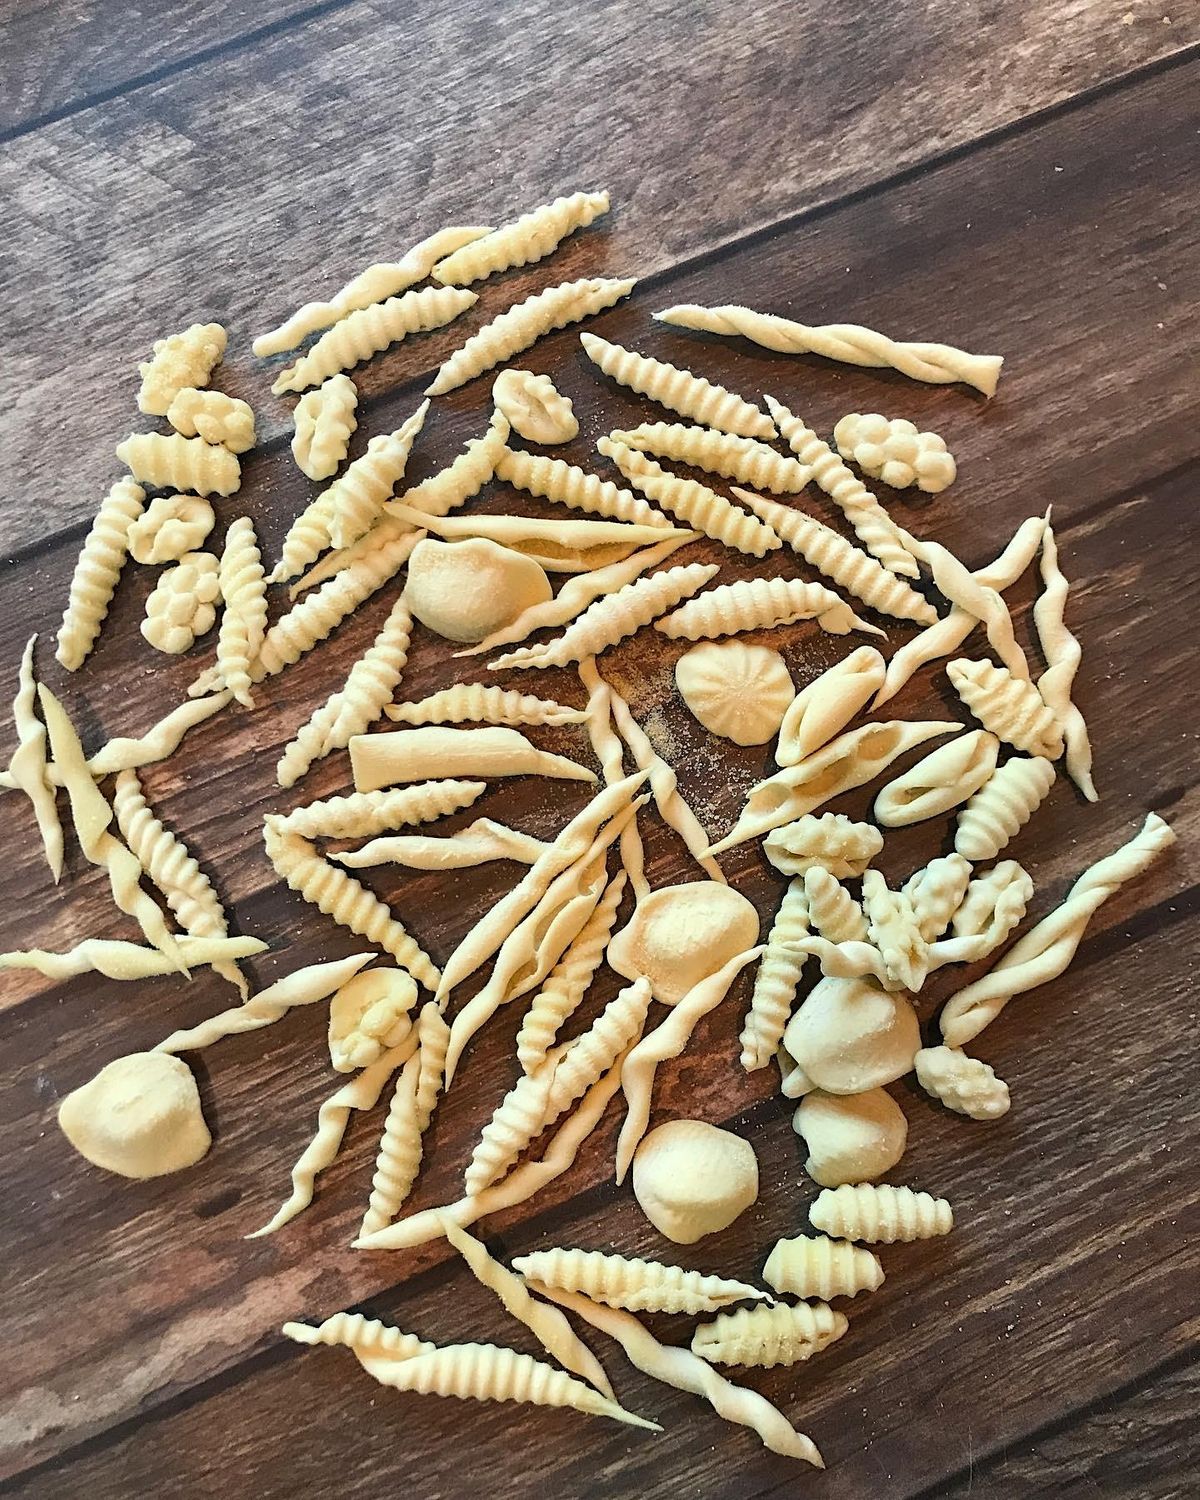 Pasta Like a Pro-Southern hand formed pasta workshops